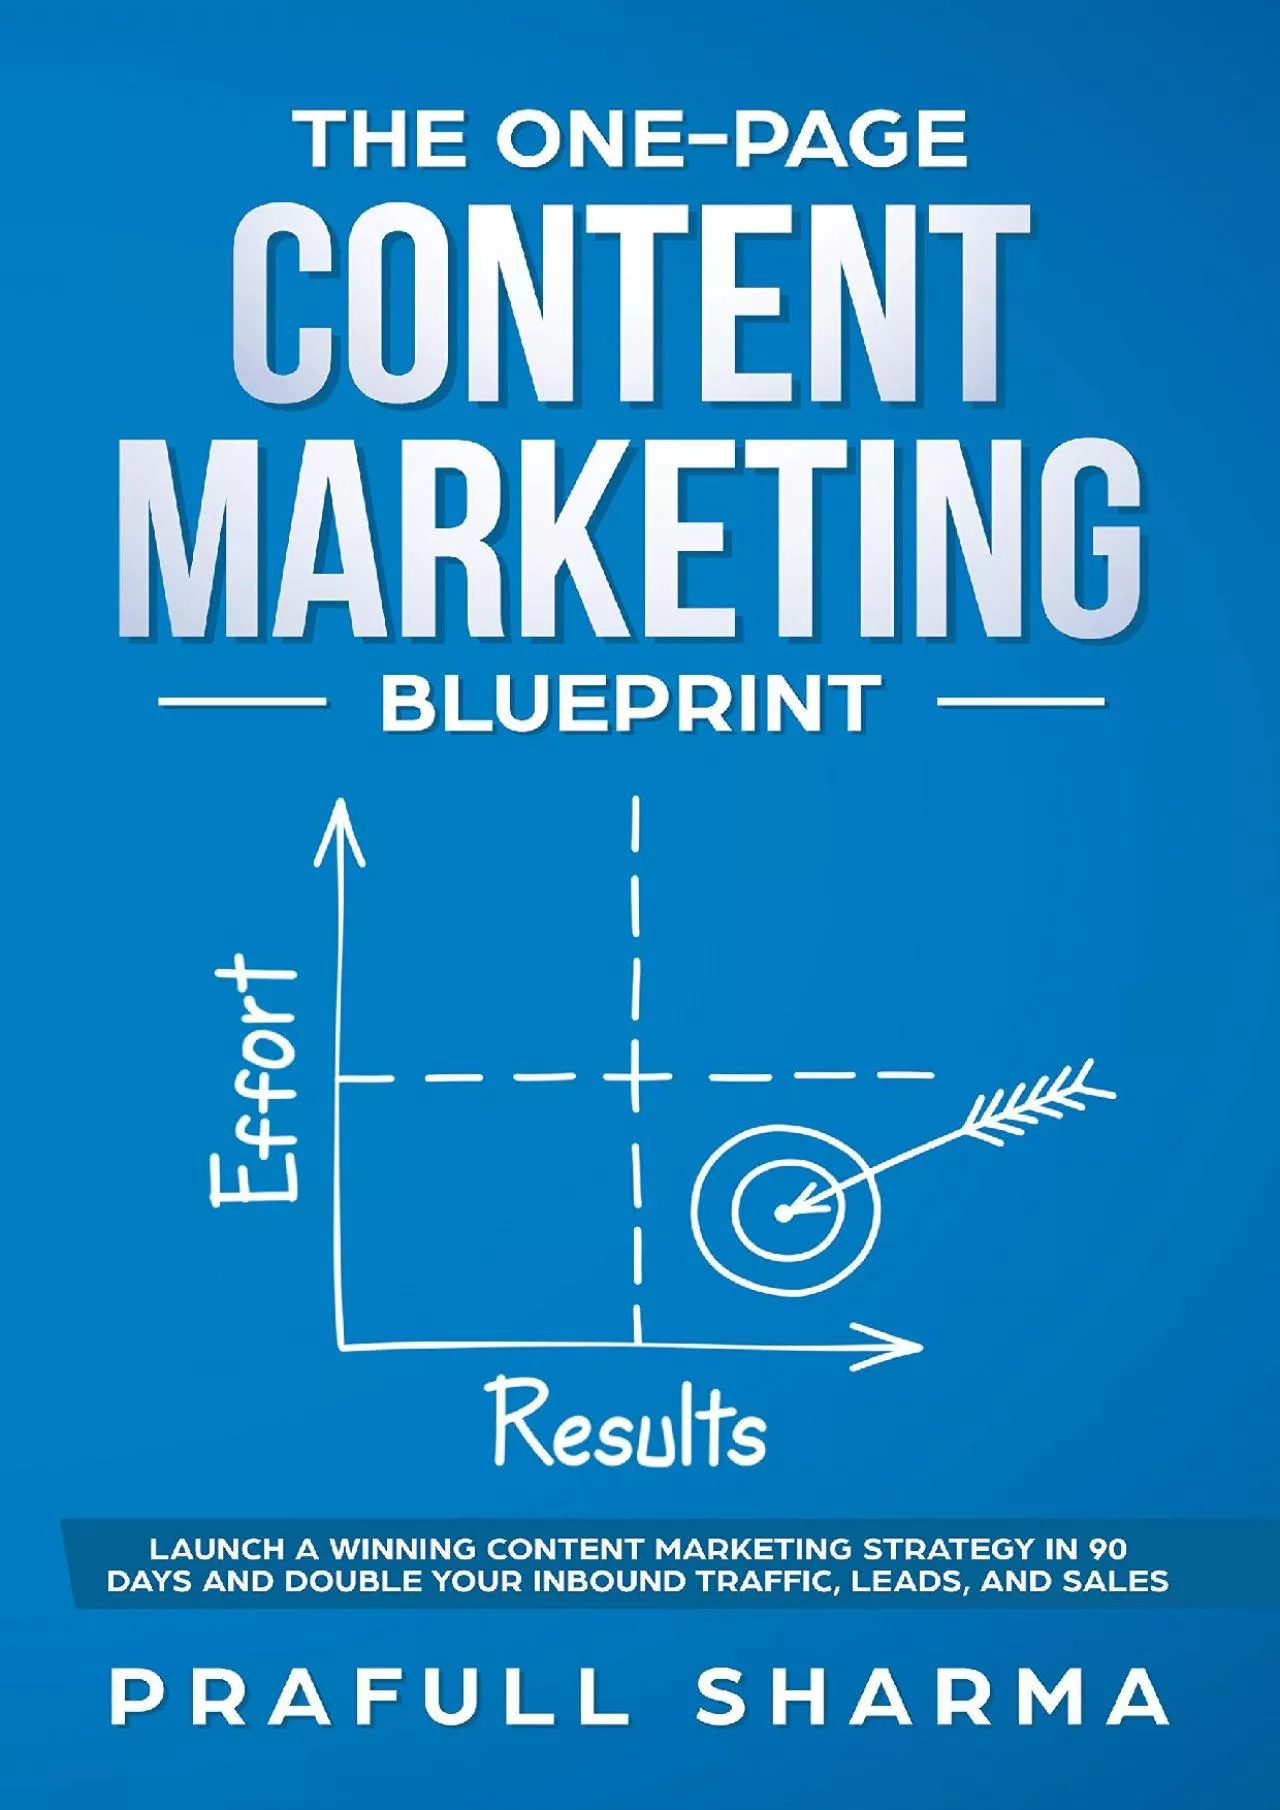 The OnePage Content Marketing Blueprint Step by Step Guide to Launch a Winning Content